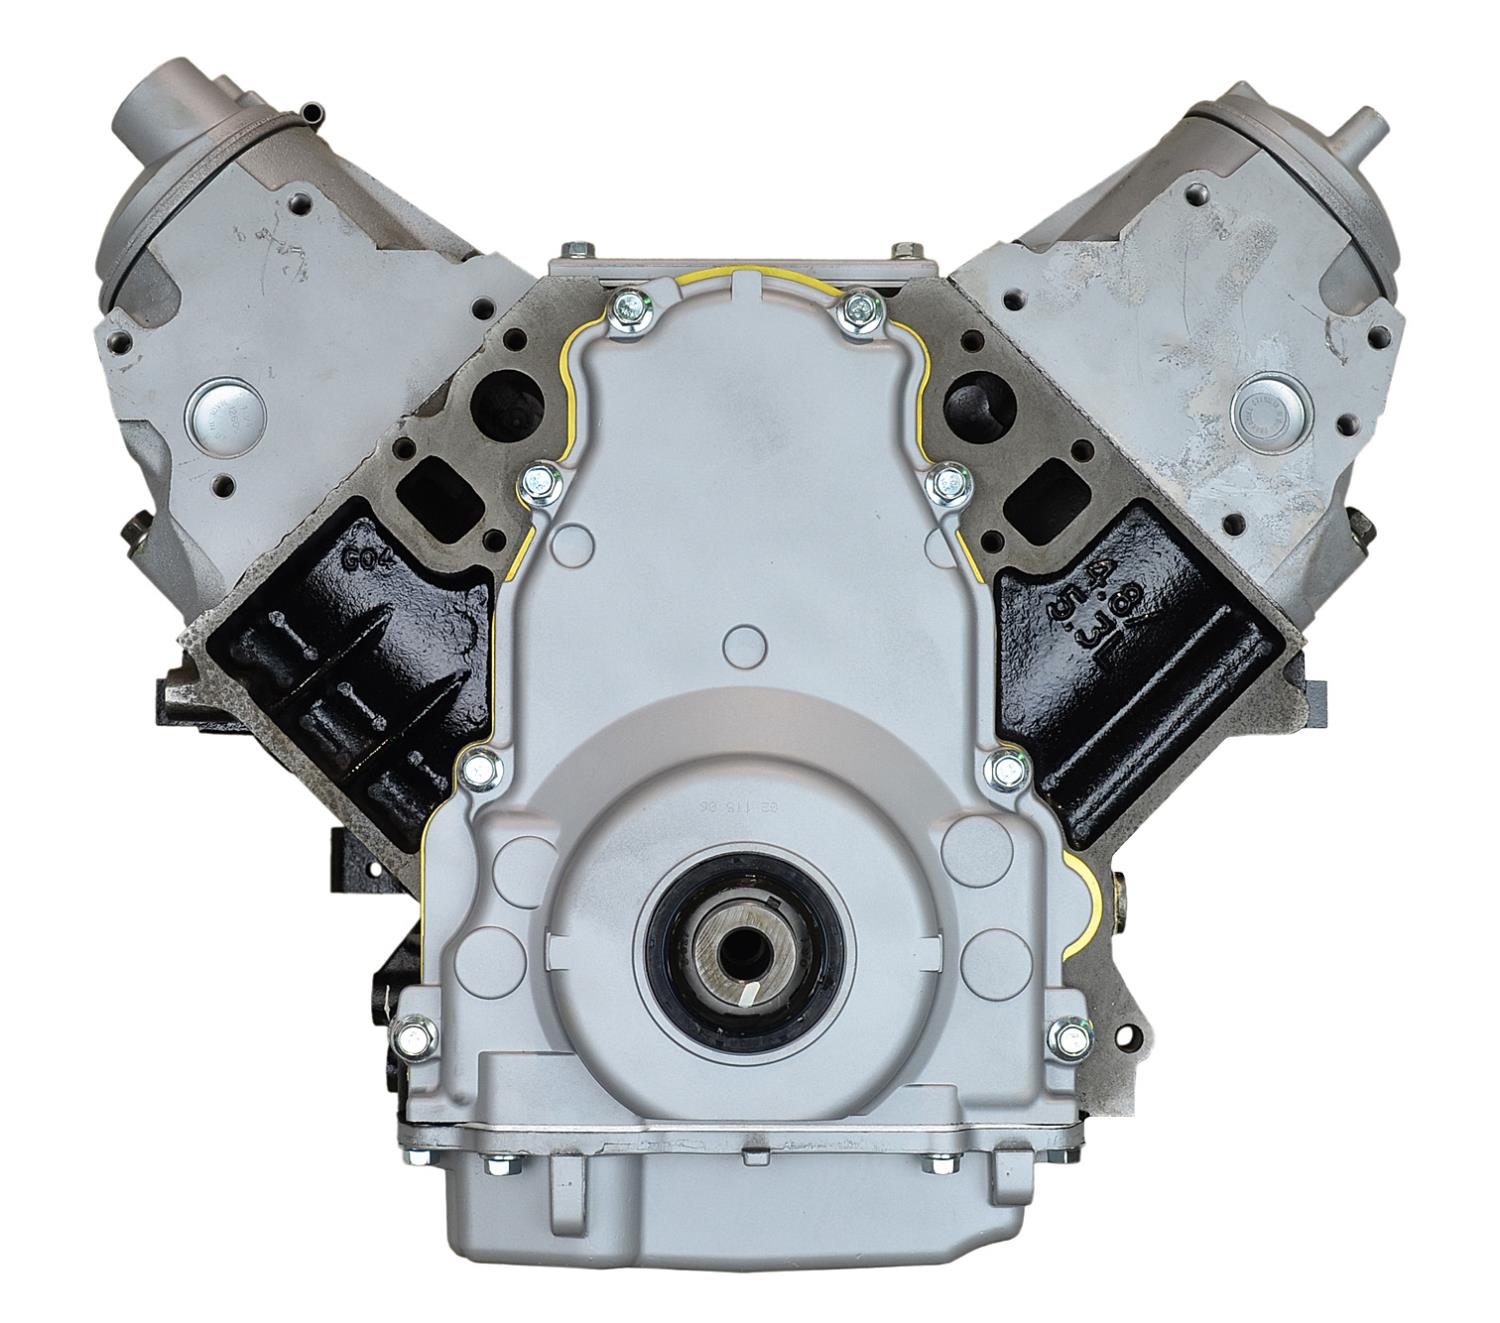 VCTC4WD Remanufactured Crate Engine for 1999-2007 Chevy/GMC Truck, SUV & Van with 4.8L V8